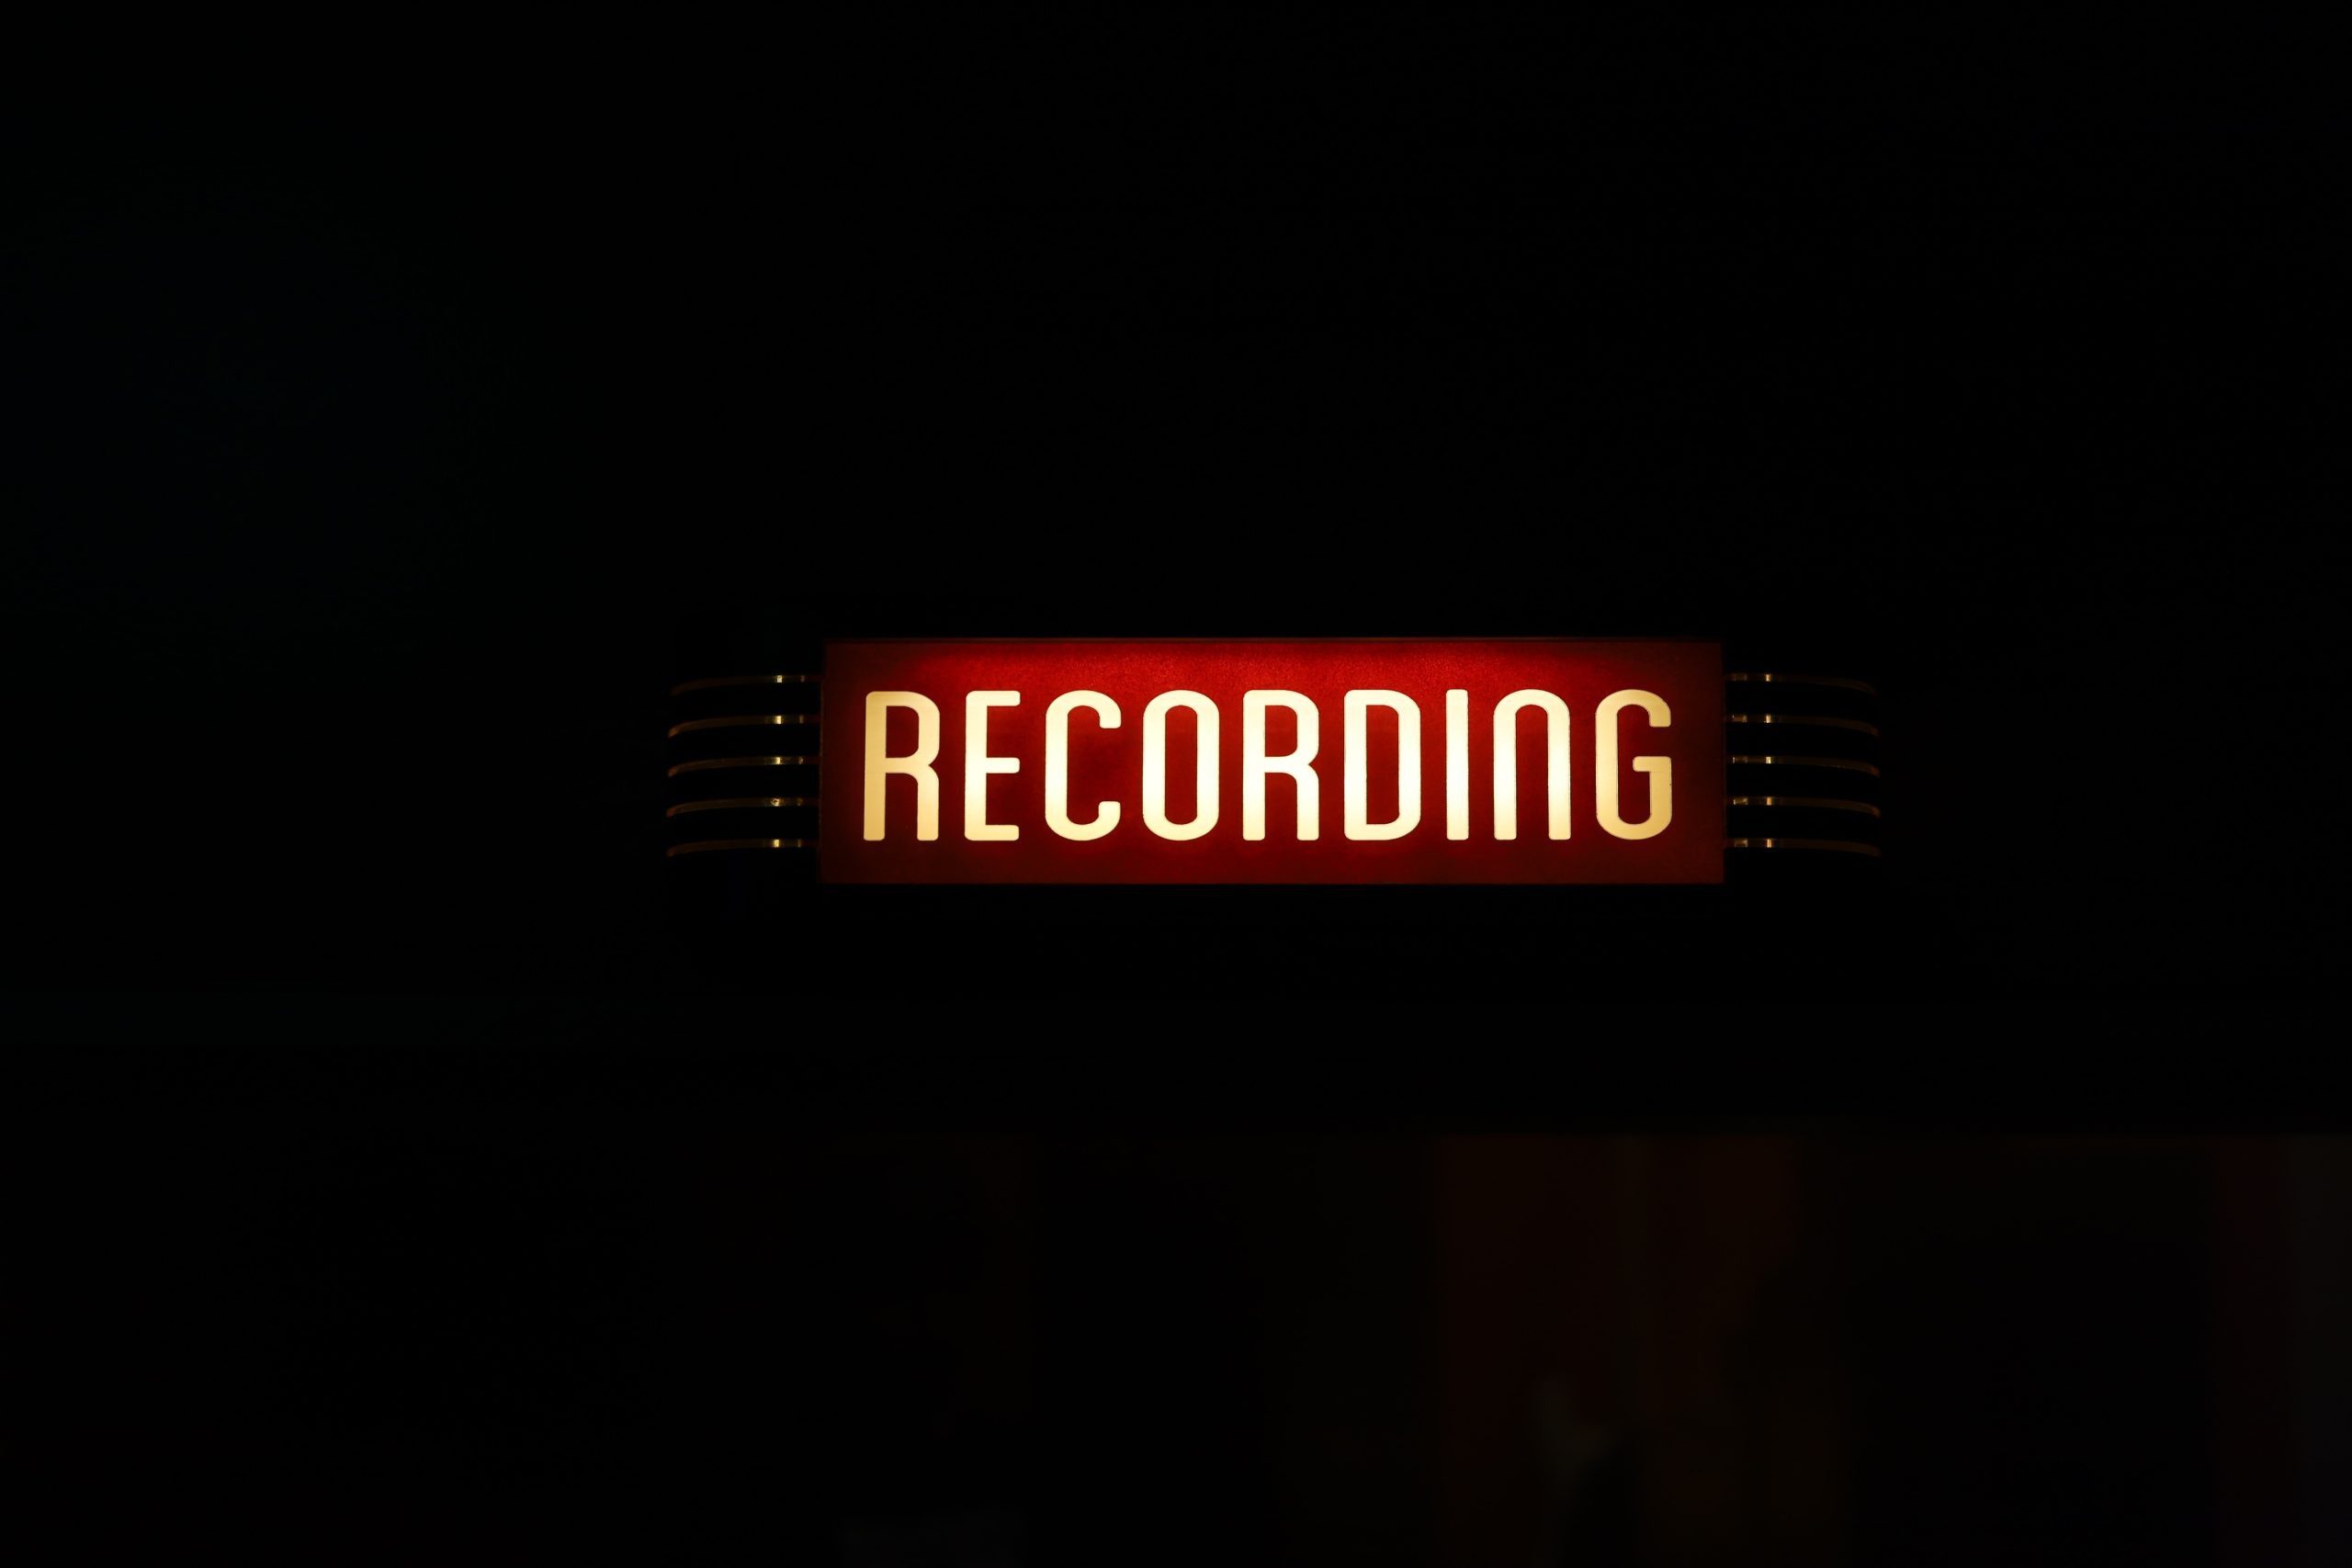 An image of recording